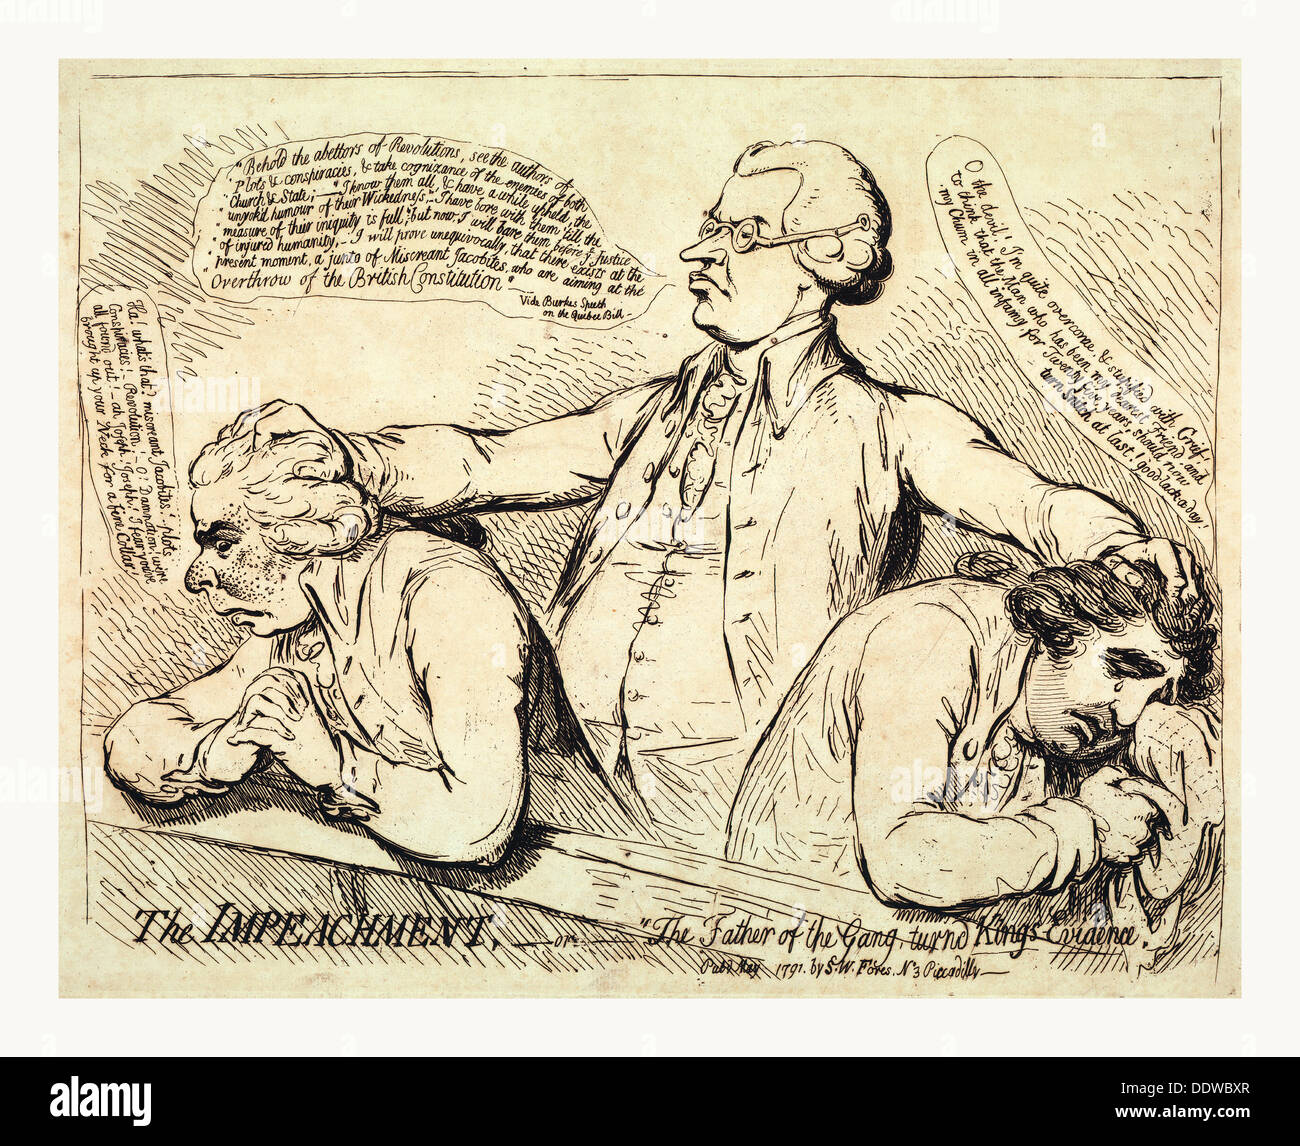 The impeachment, or The father of the gang turned Kings evidence, Gillray, James, 1756-1815, artist, engraving 1791, Edmund Burk Stock Photo